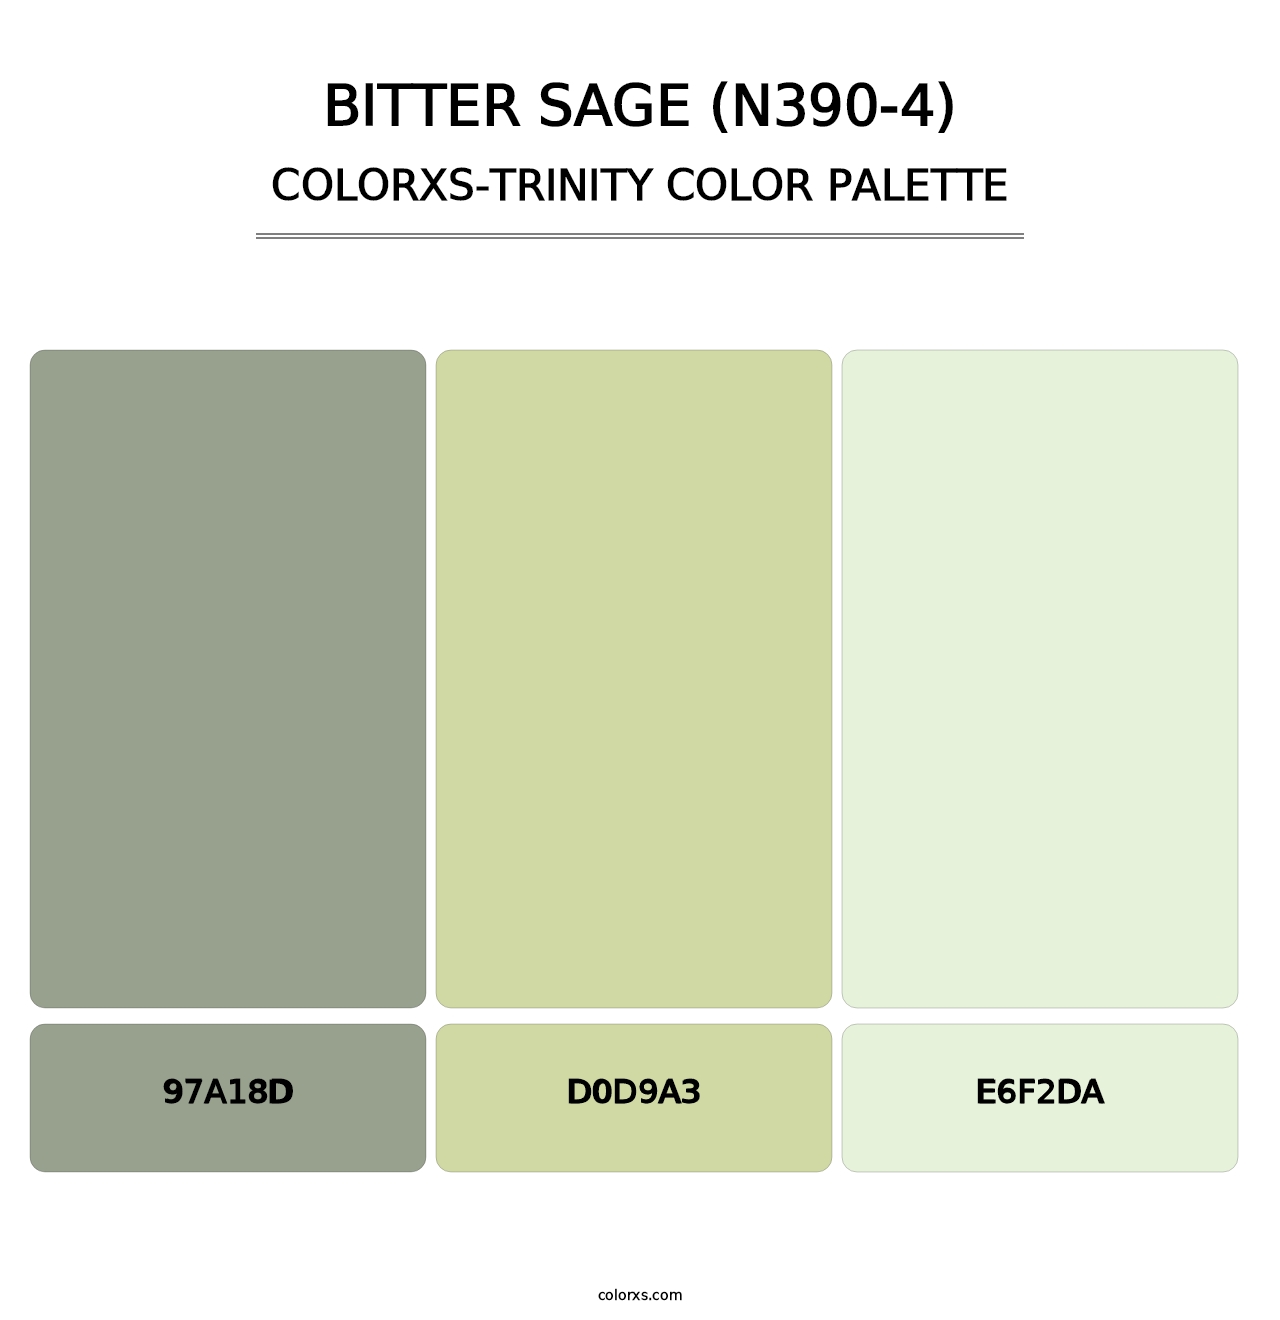 Bitter Sage (N390-4) - Colorxs Trinity Palette